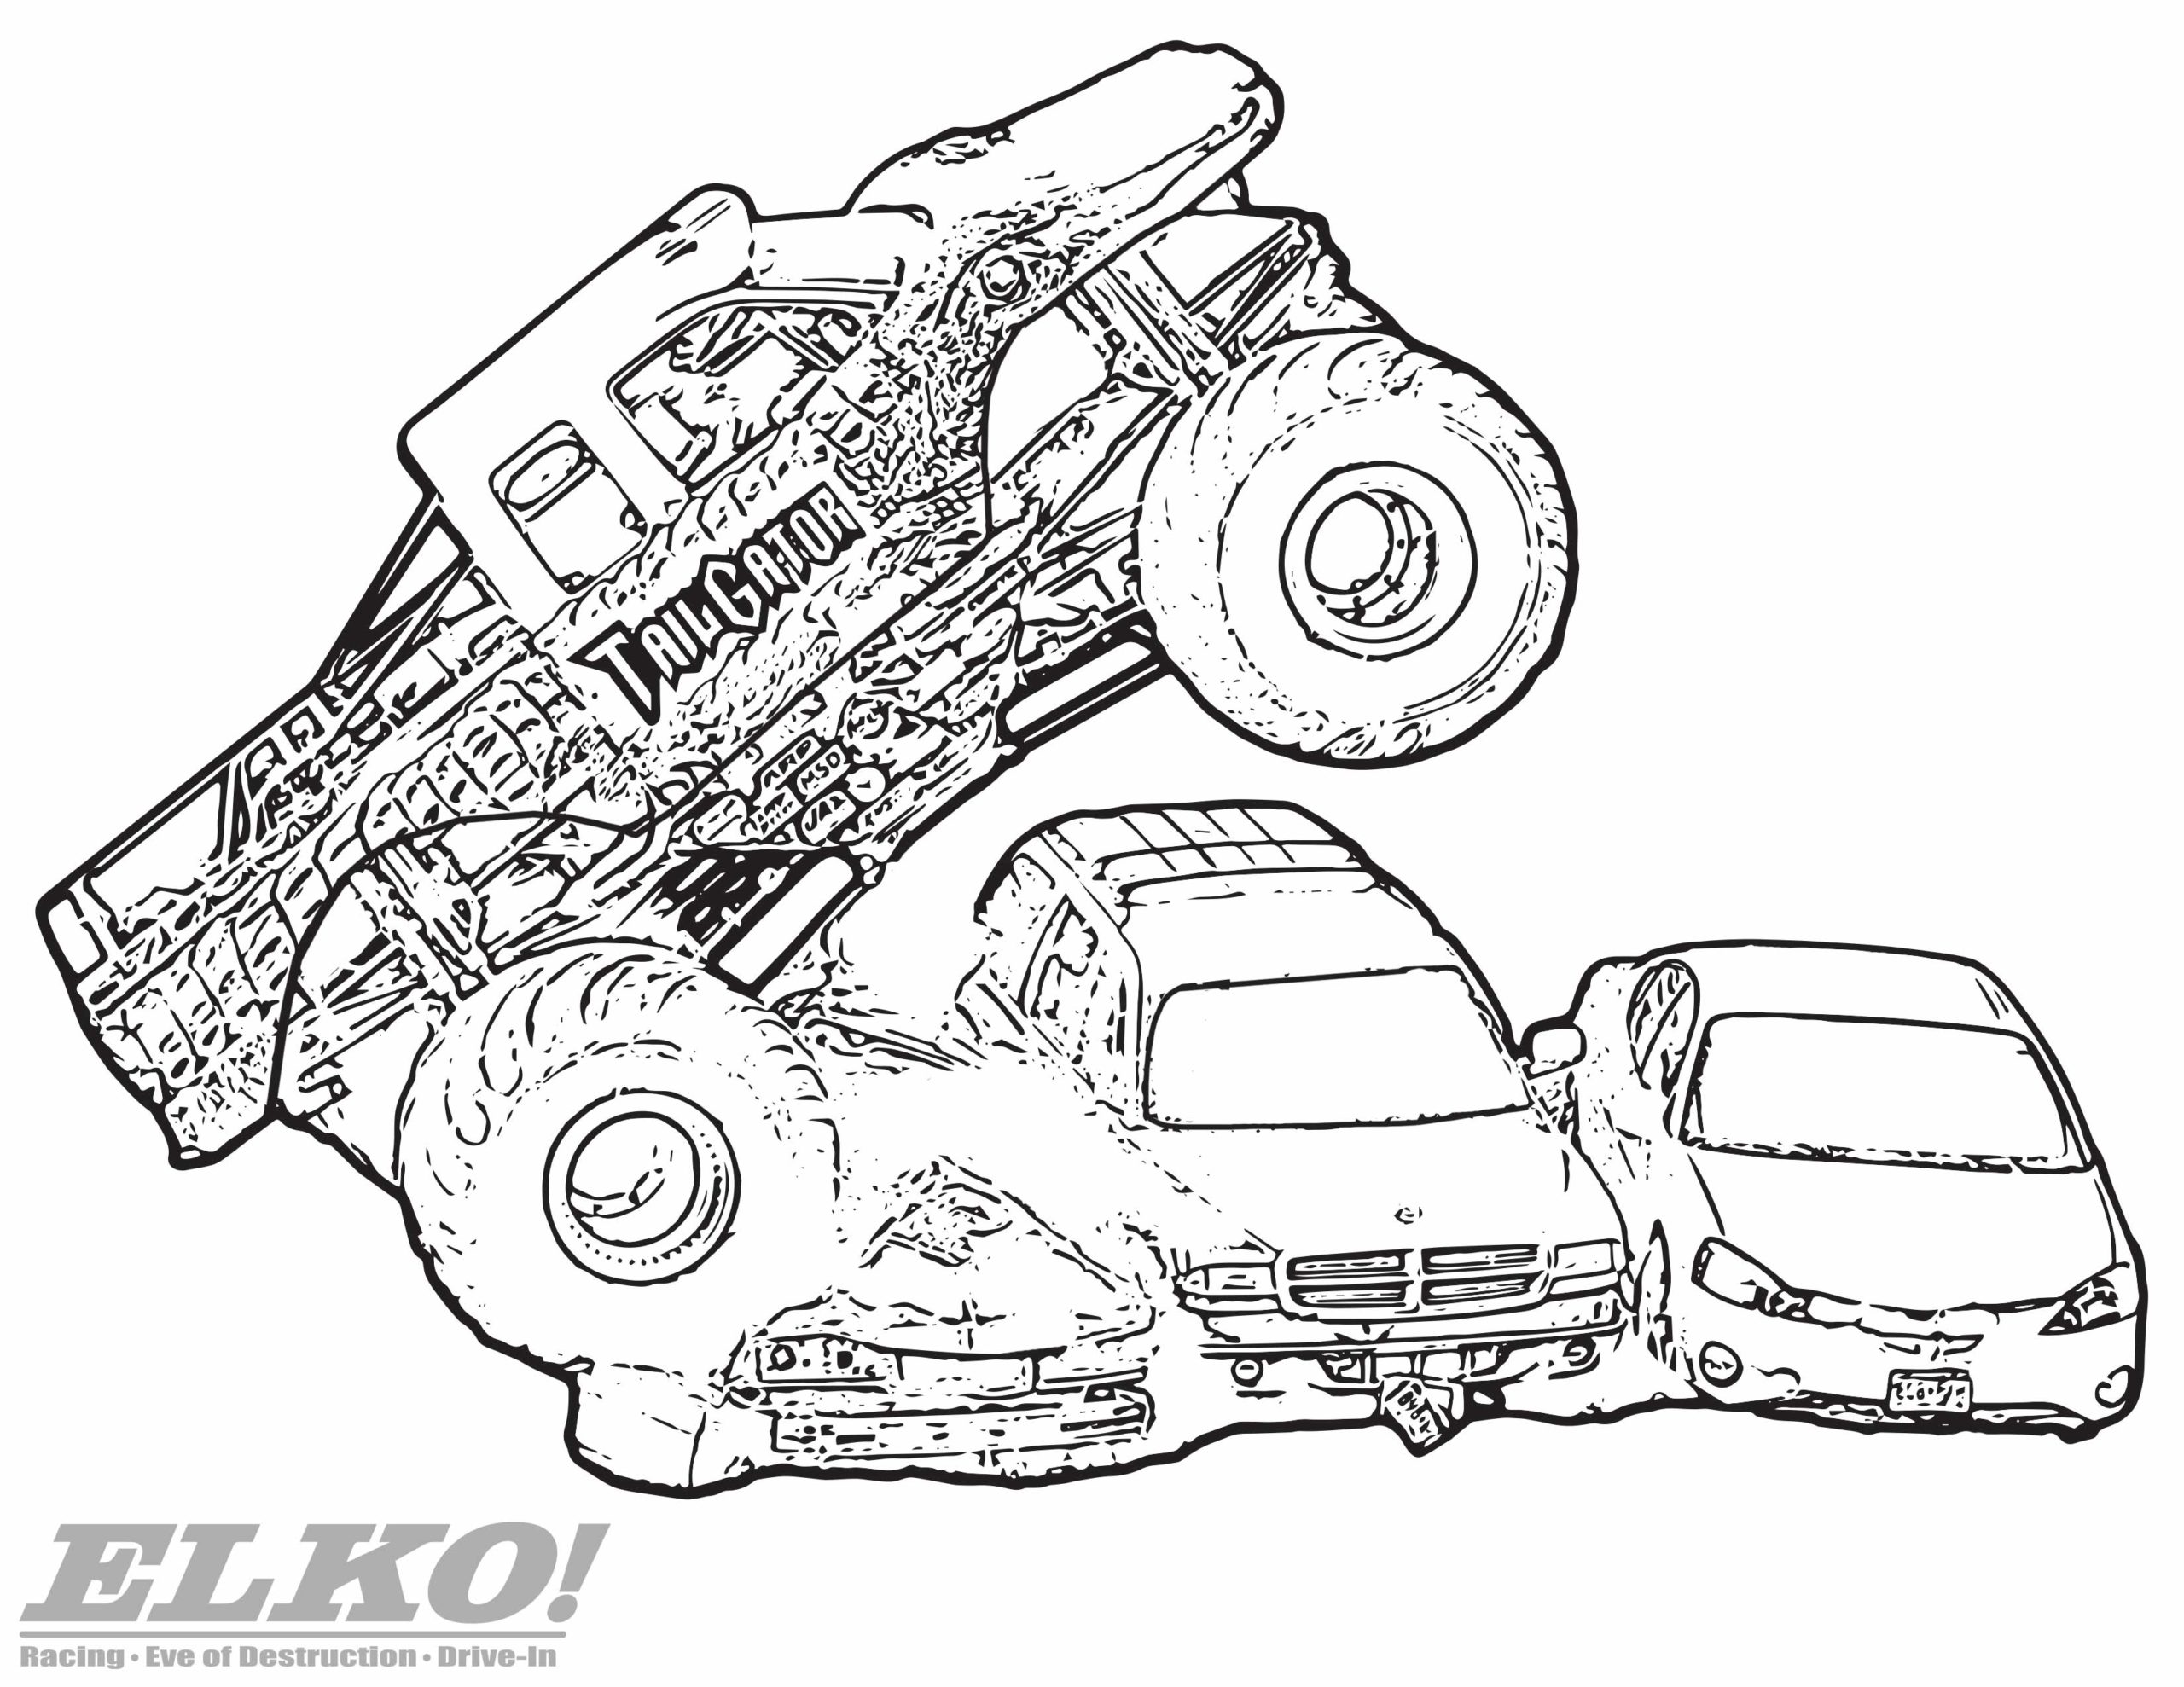 nascar 2 coloring pages